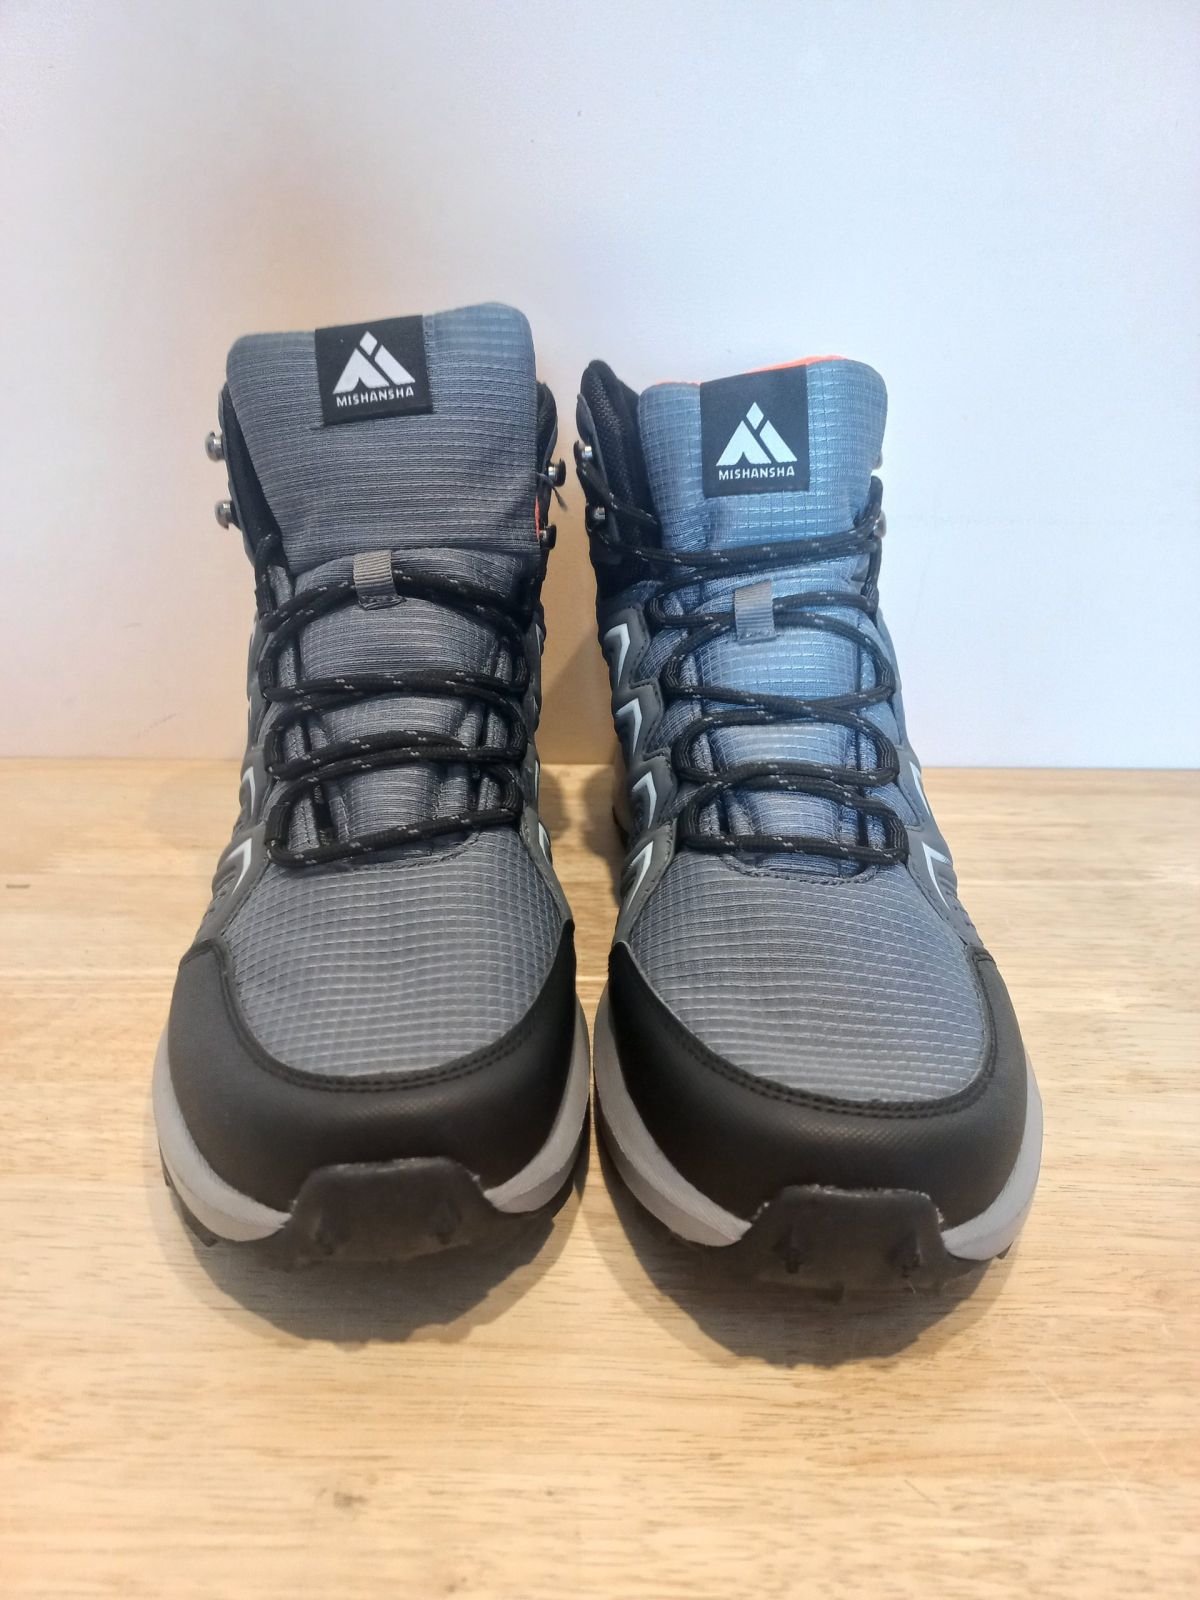 Hiking shoes for men and women Mishansha size 43